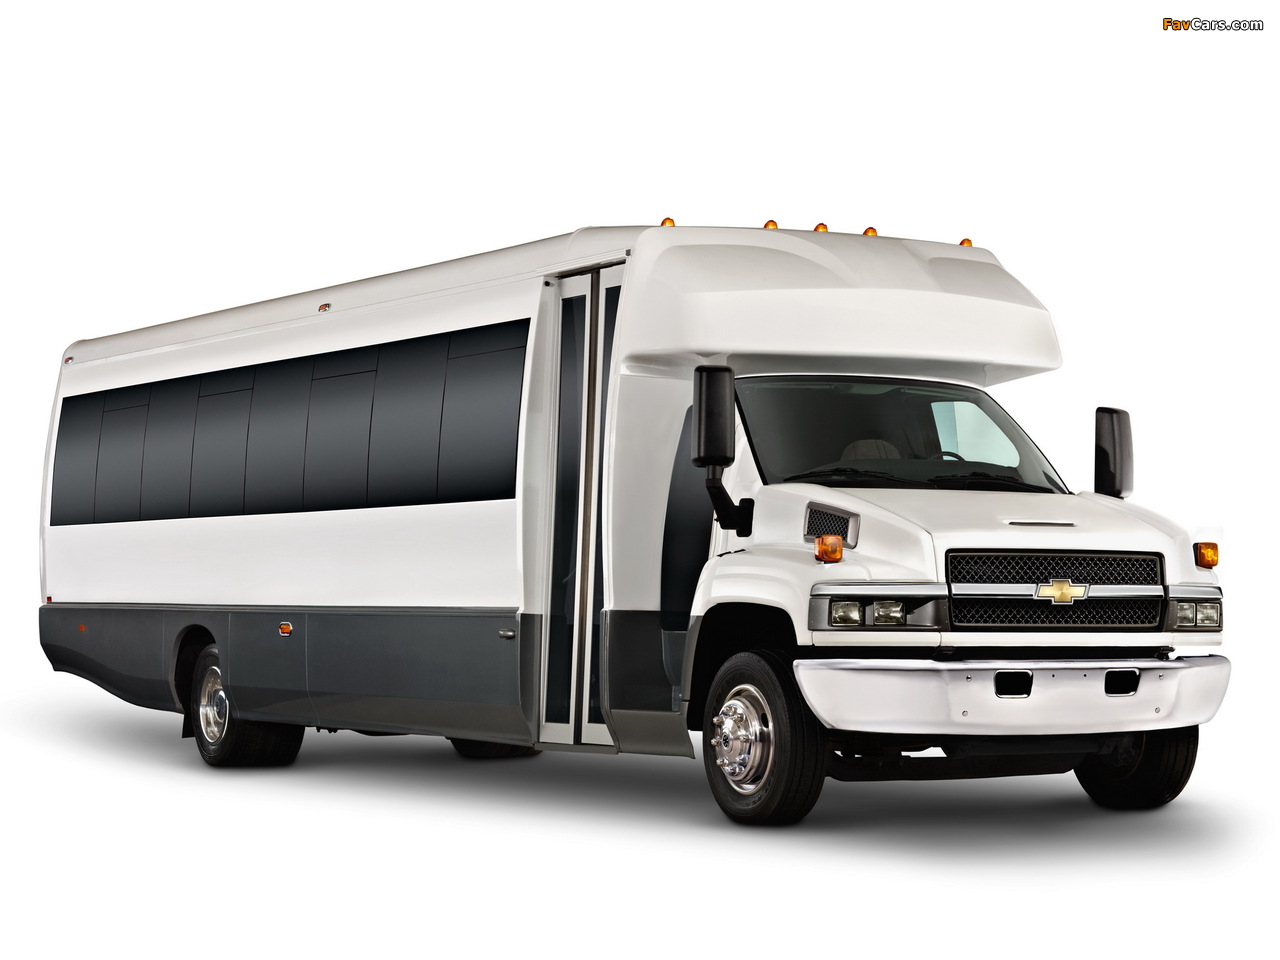 Chevrolet Express C4500 Cutaway Shuttle Bus 2010 pictures (1280 x 960)